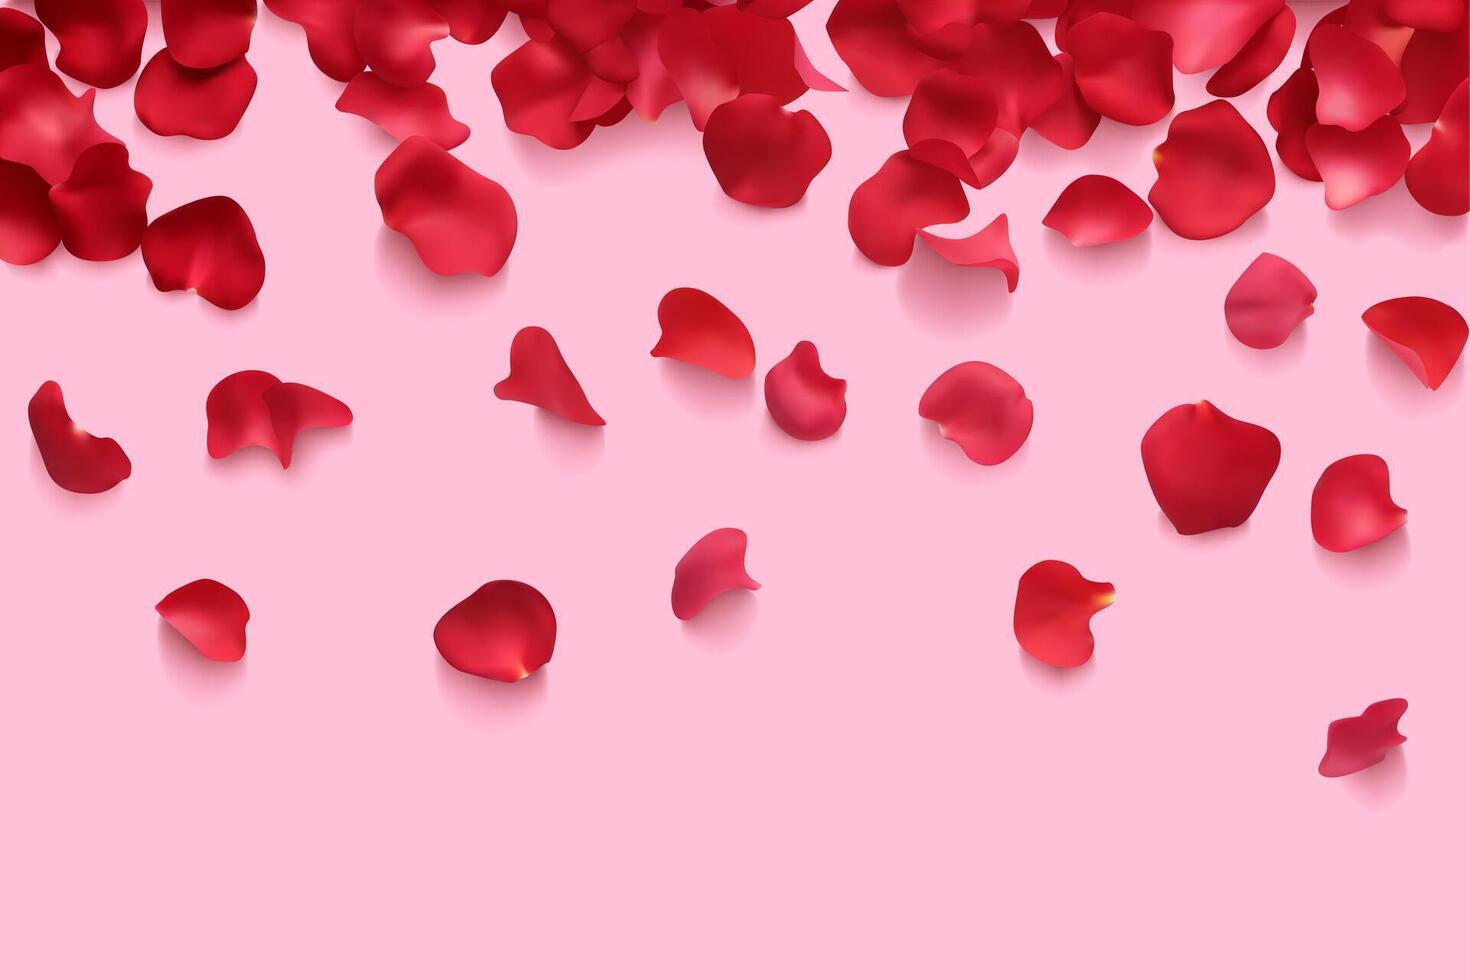 Rose tulip red petals flower background holiday romantic greeting pink banner 3d realistic vector